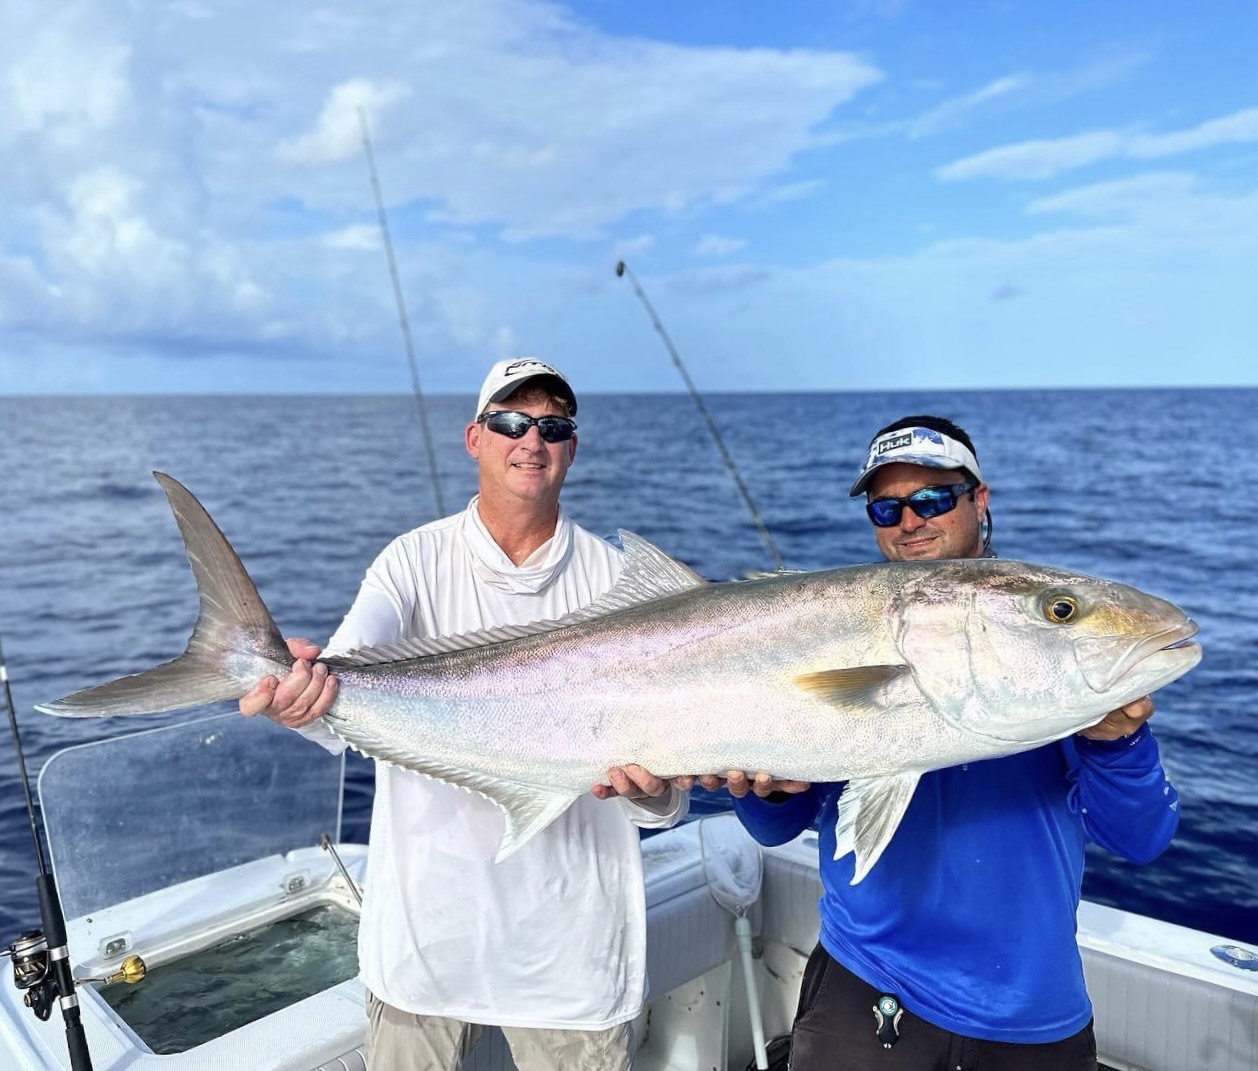 THE ANGLER'S OUTLOOK: AMBERJACKS MAKE FOR AN UNFORGETTABLE FIGHT